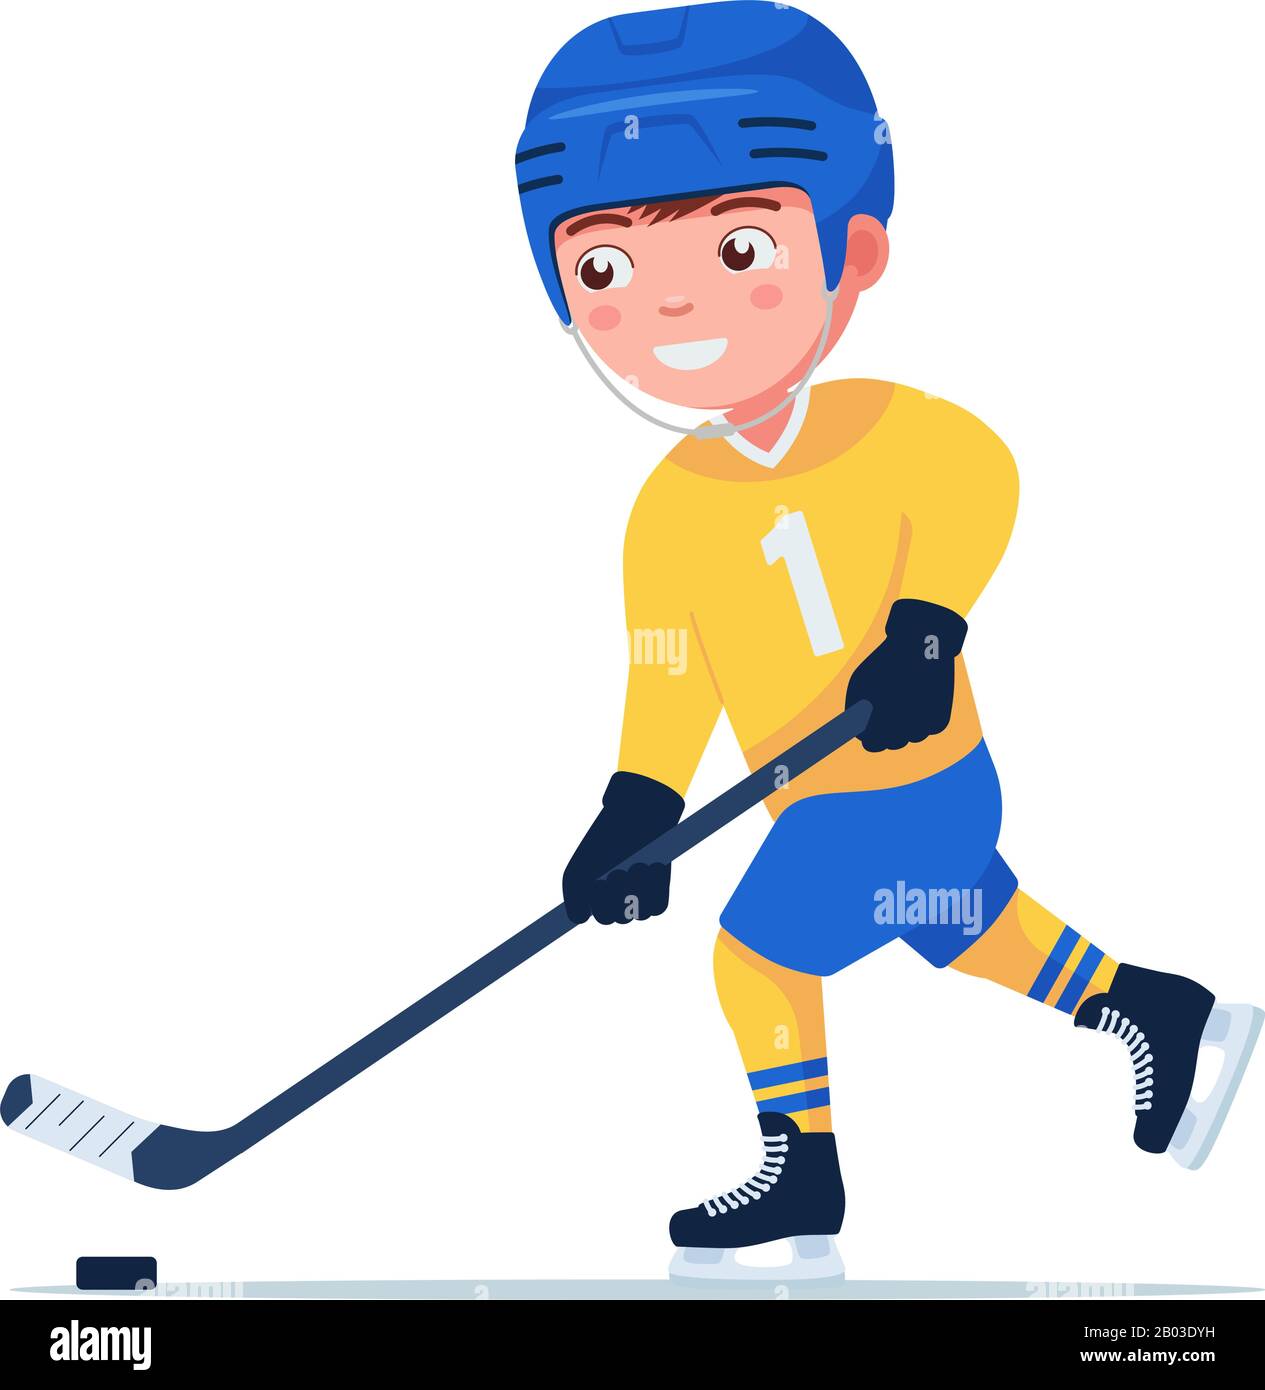 Ice Hockey Stick with Puck. Sports Vector Illustration Isolated on